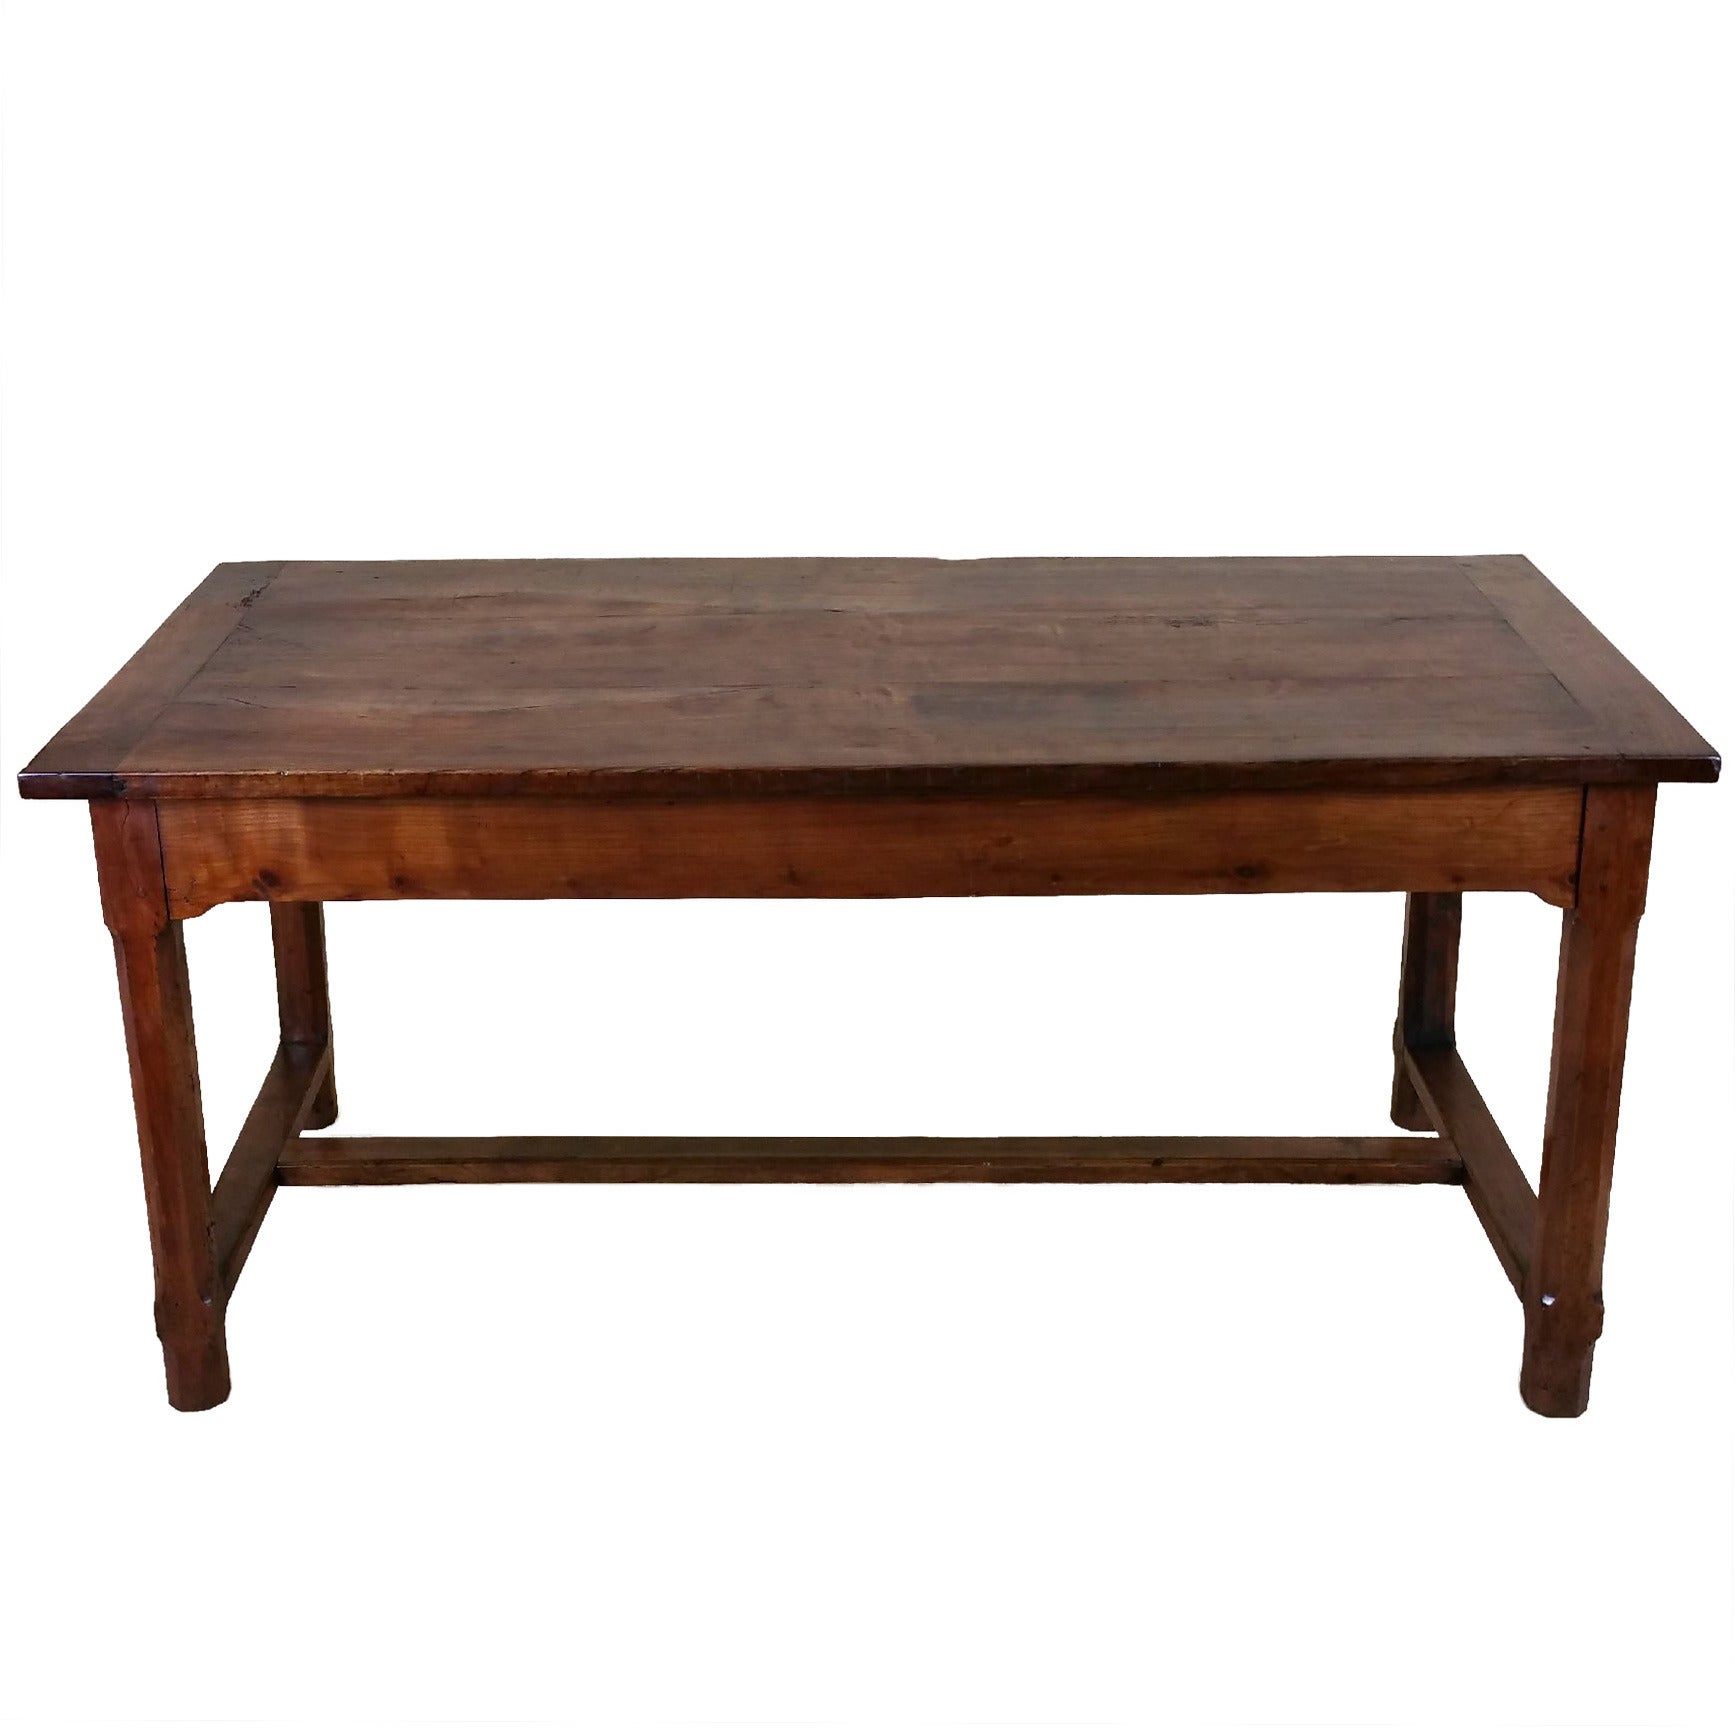 Early 19th Century French Cherrywood Farm House Table